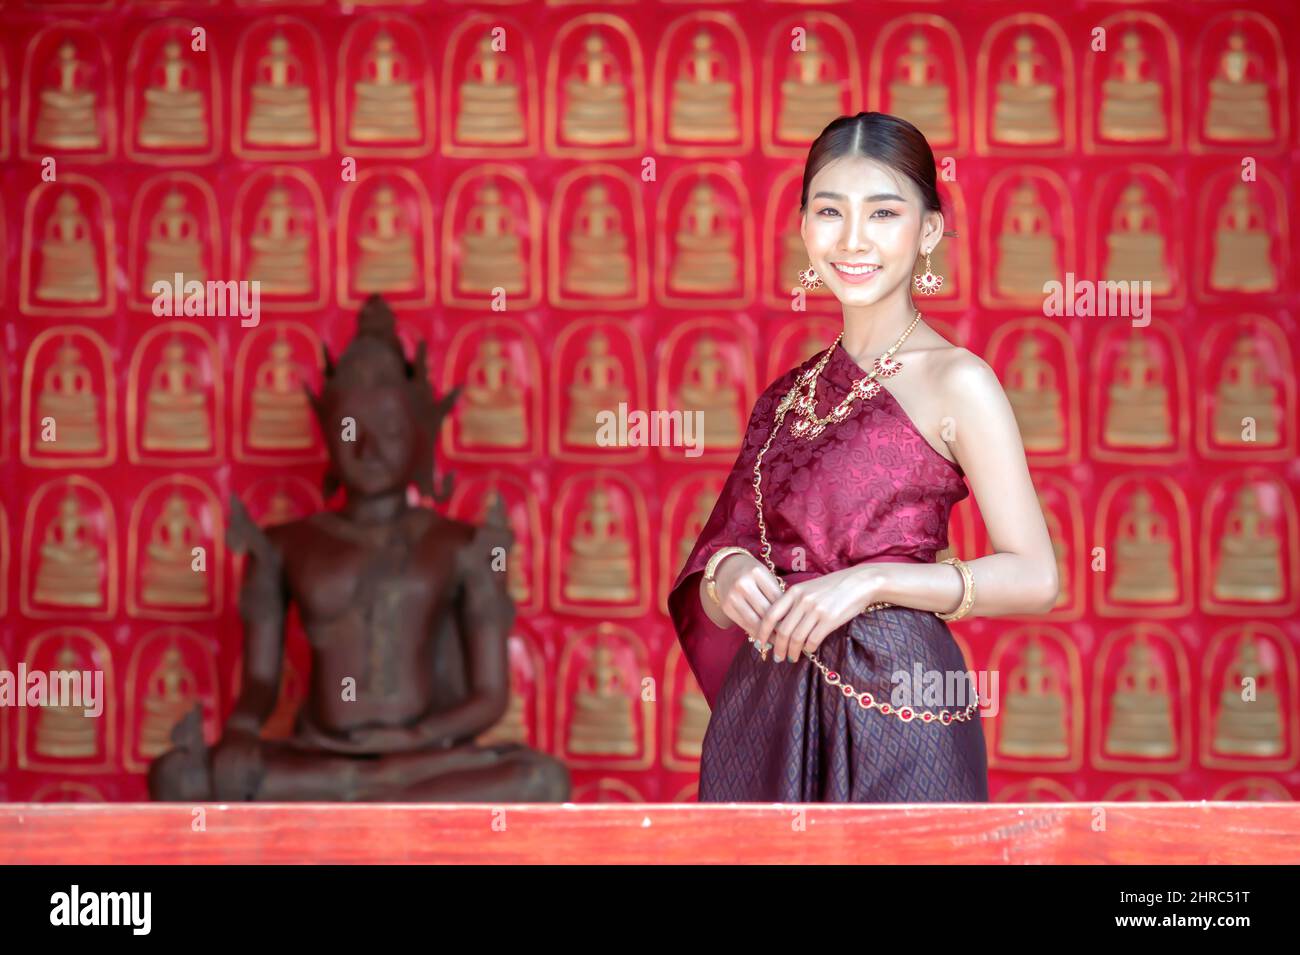 Portrait of a smiling woman in traditional clothing standing by a Buddha statue, Chiang Mai, Thailand Stock Photo